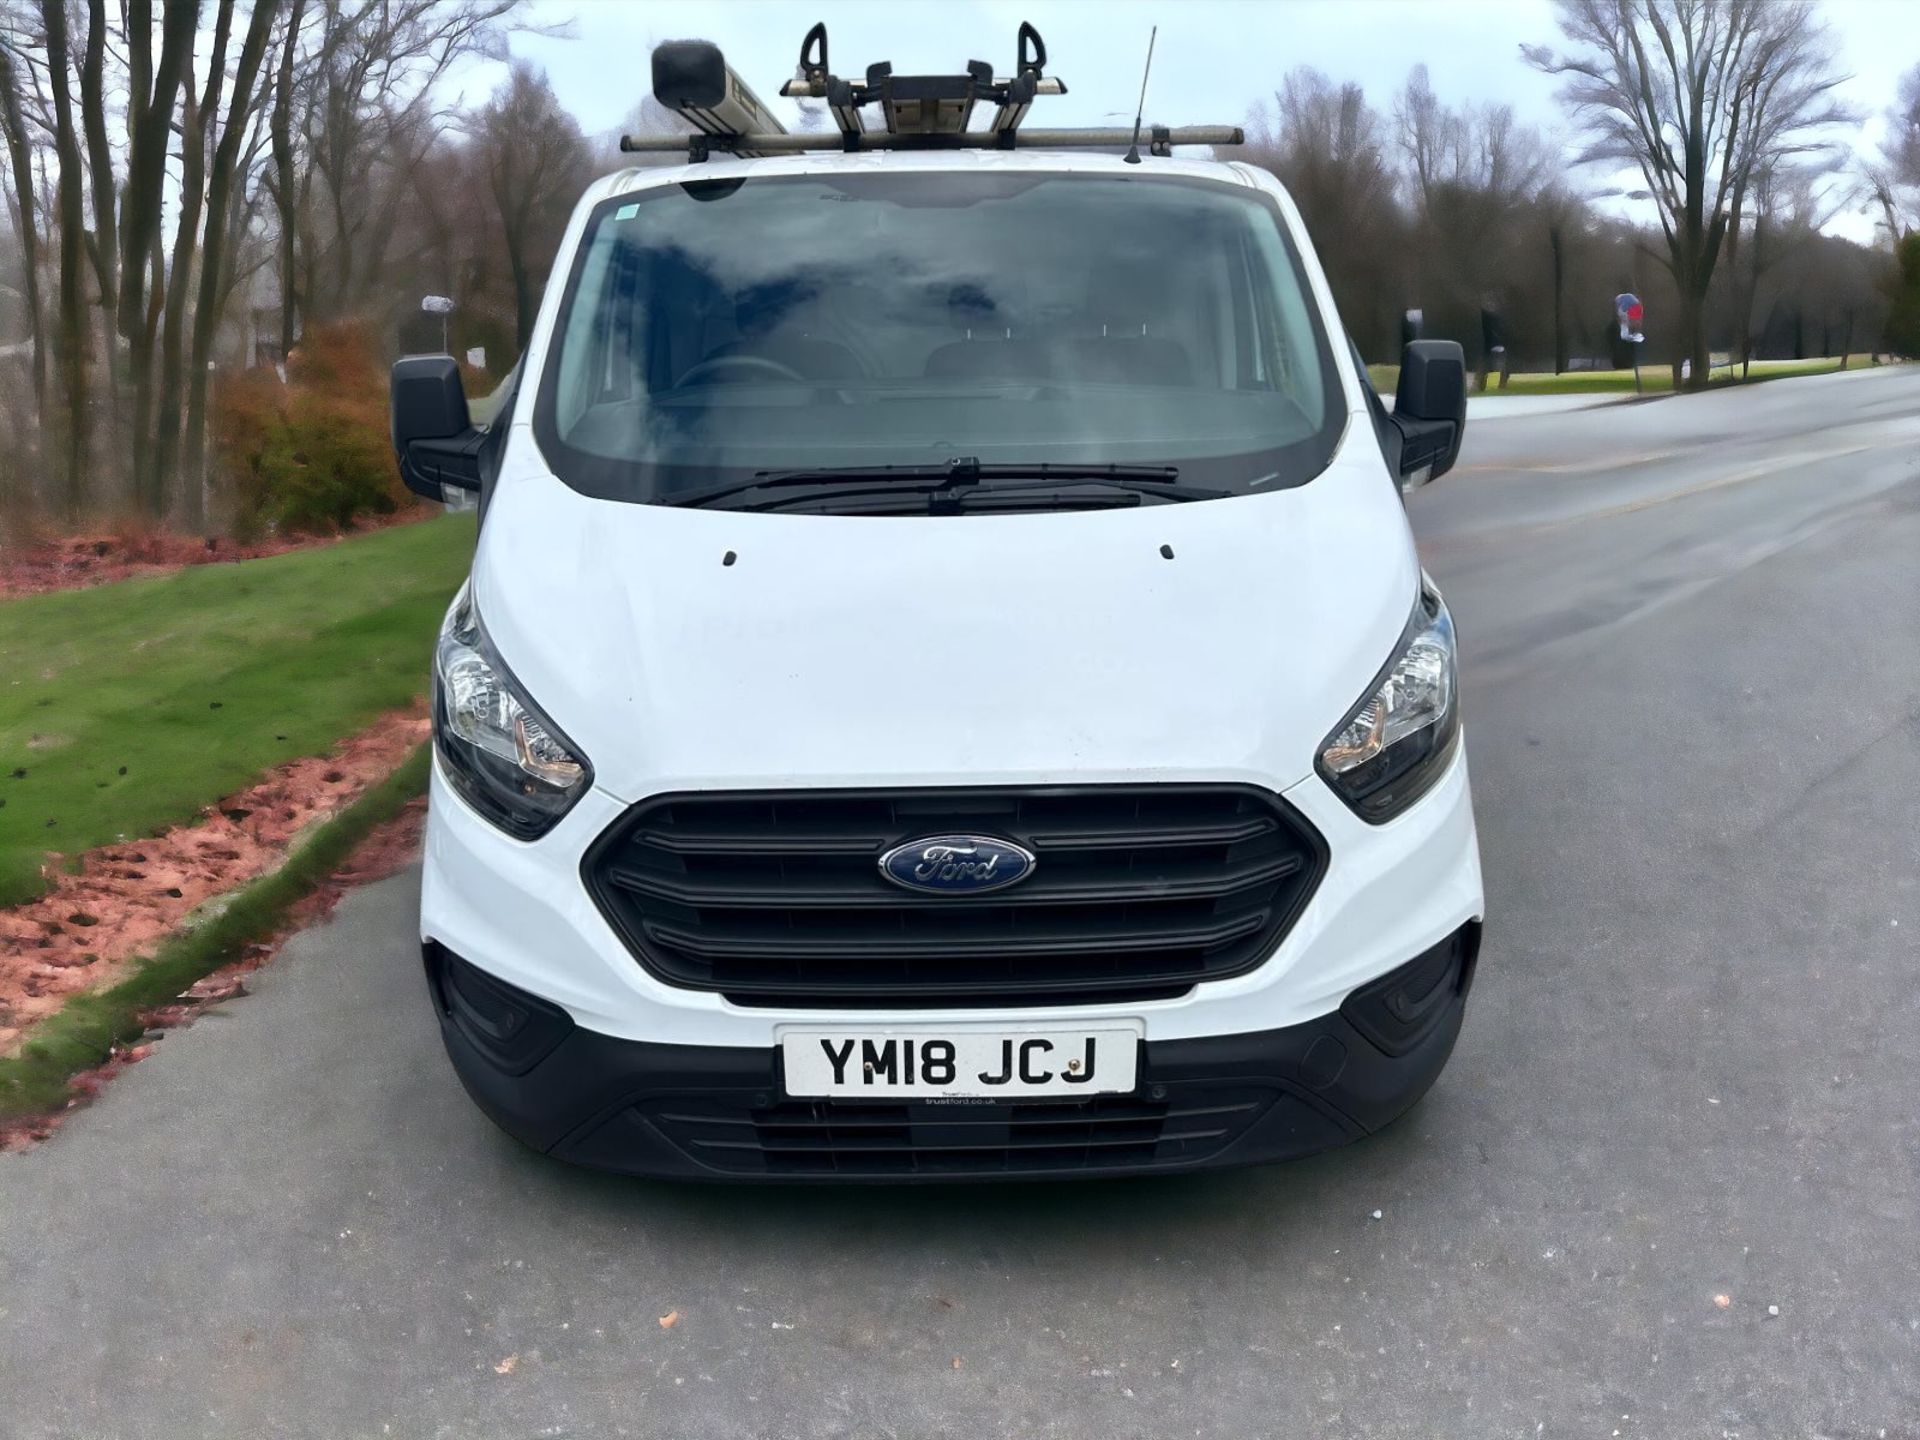 2018-18 REG FORD TRANSIT CUSTOM 280 SWB L1H1- HPI CLEAR - READY FOR ACTION ! - Image 2 of 15